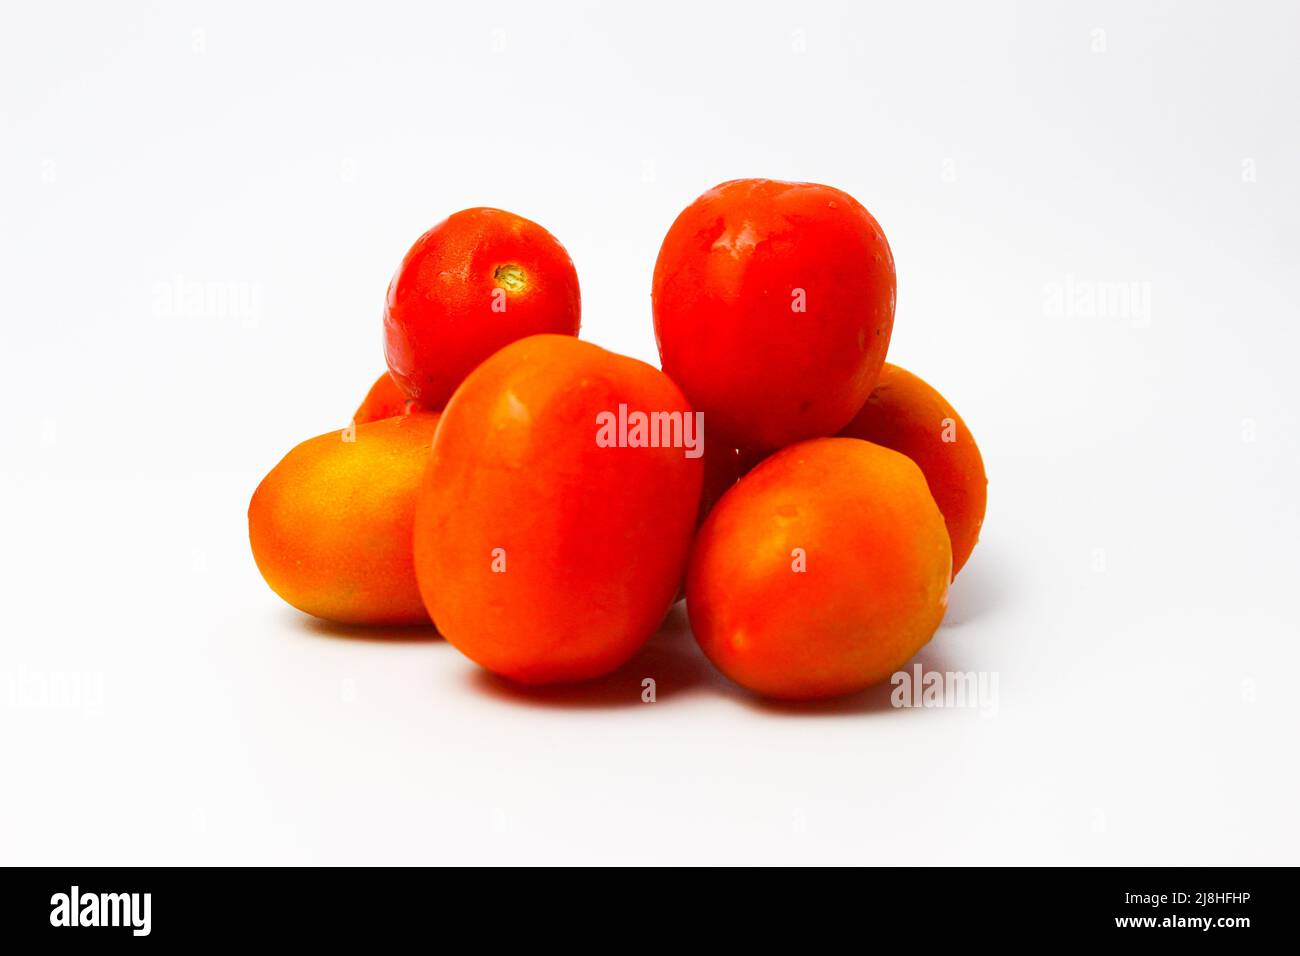 Red Tomatoes on White Background Stock Photo